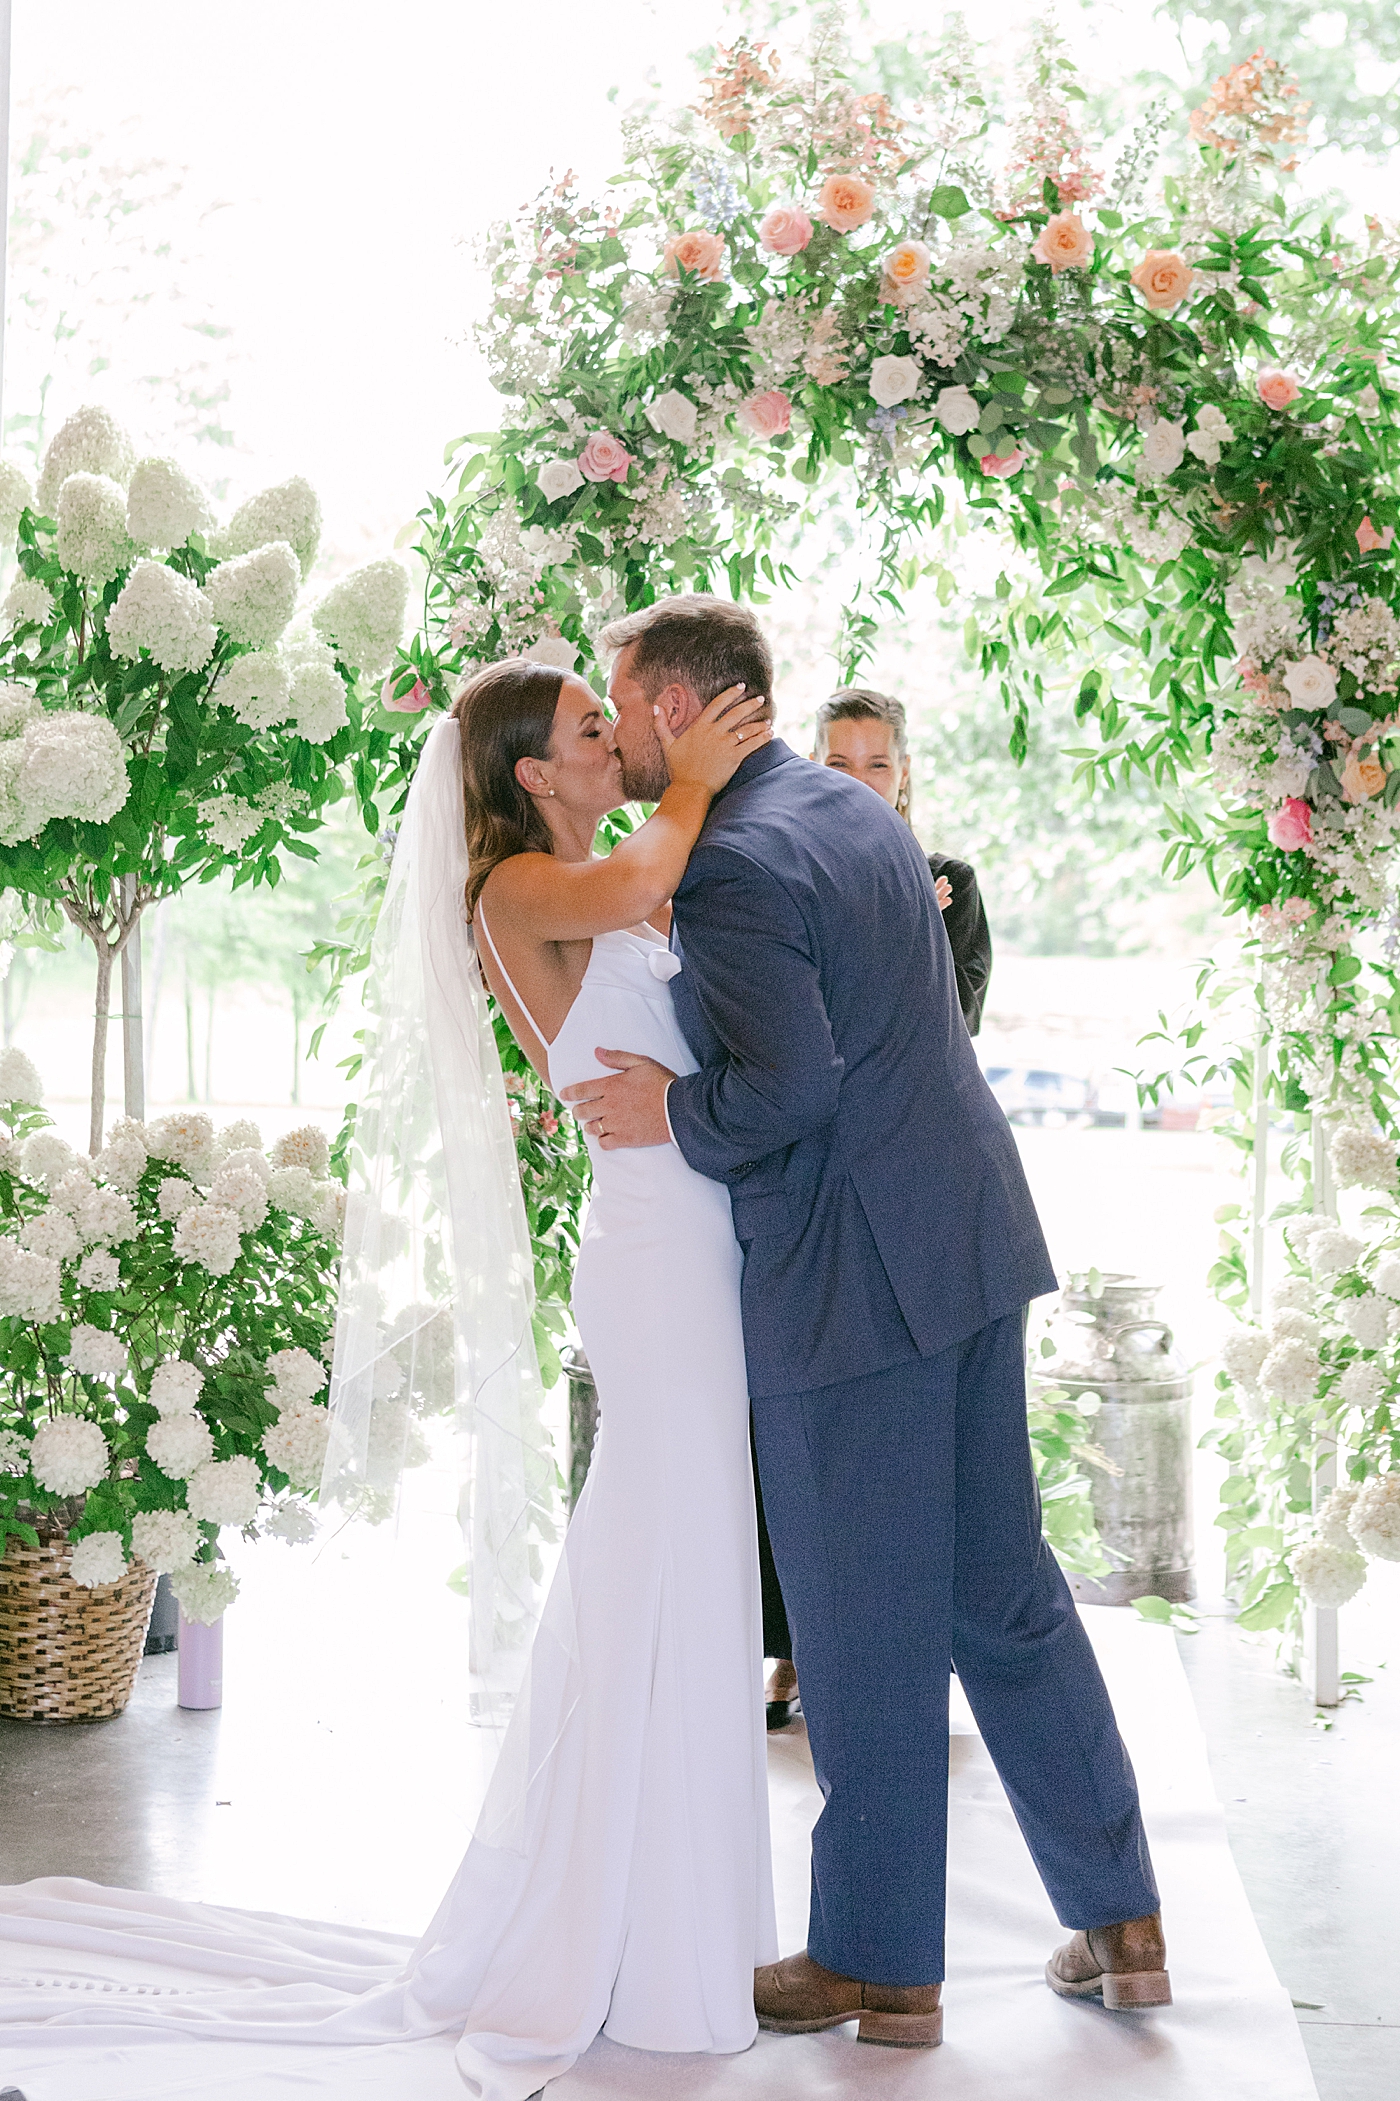 Bride and groom first kiss | Image by Hope Helmuth Photography